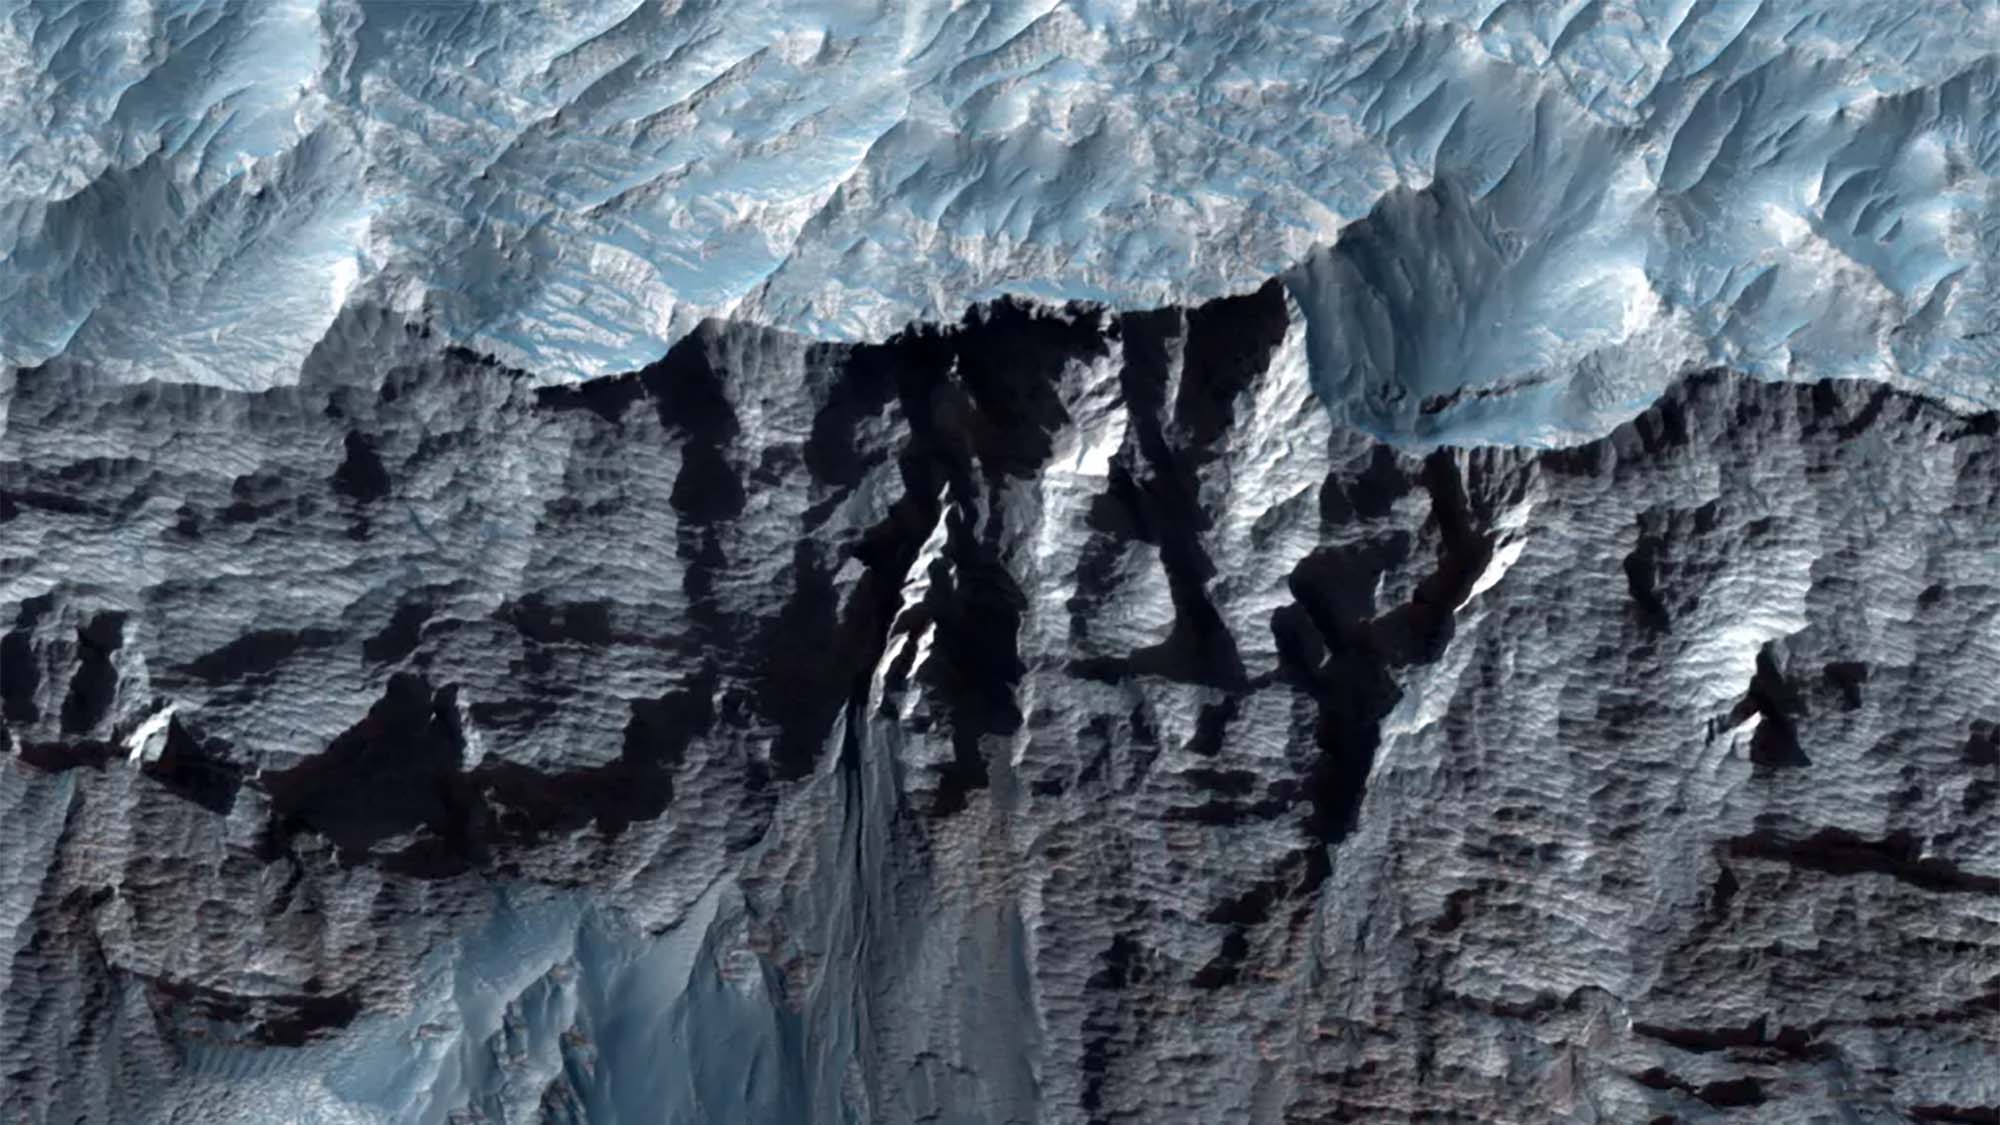 A close-up photo of part of Mars' Valles Marineris, the single largest canyon in the solar system.